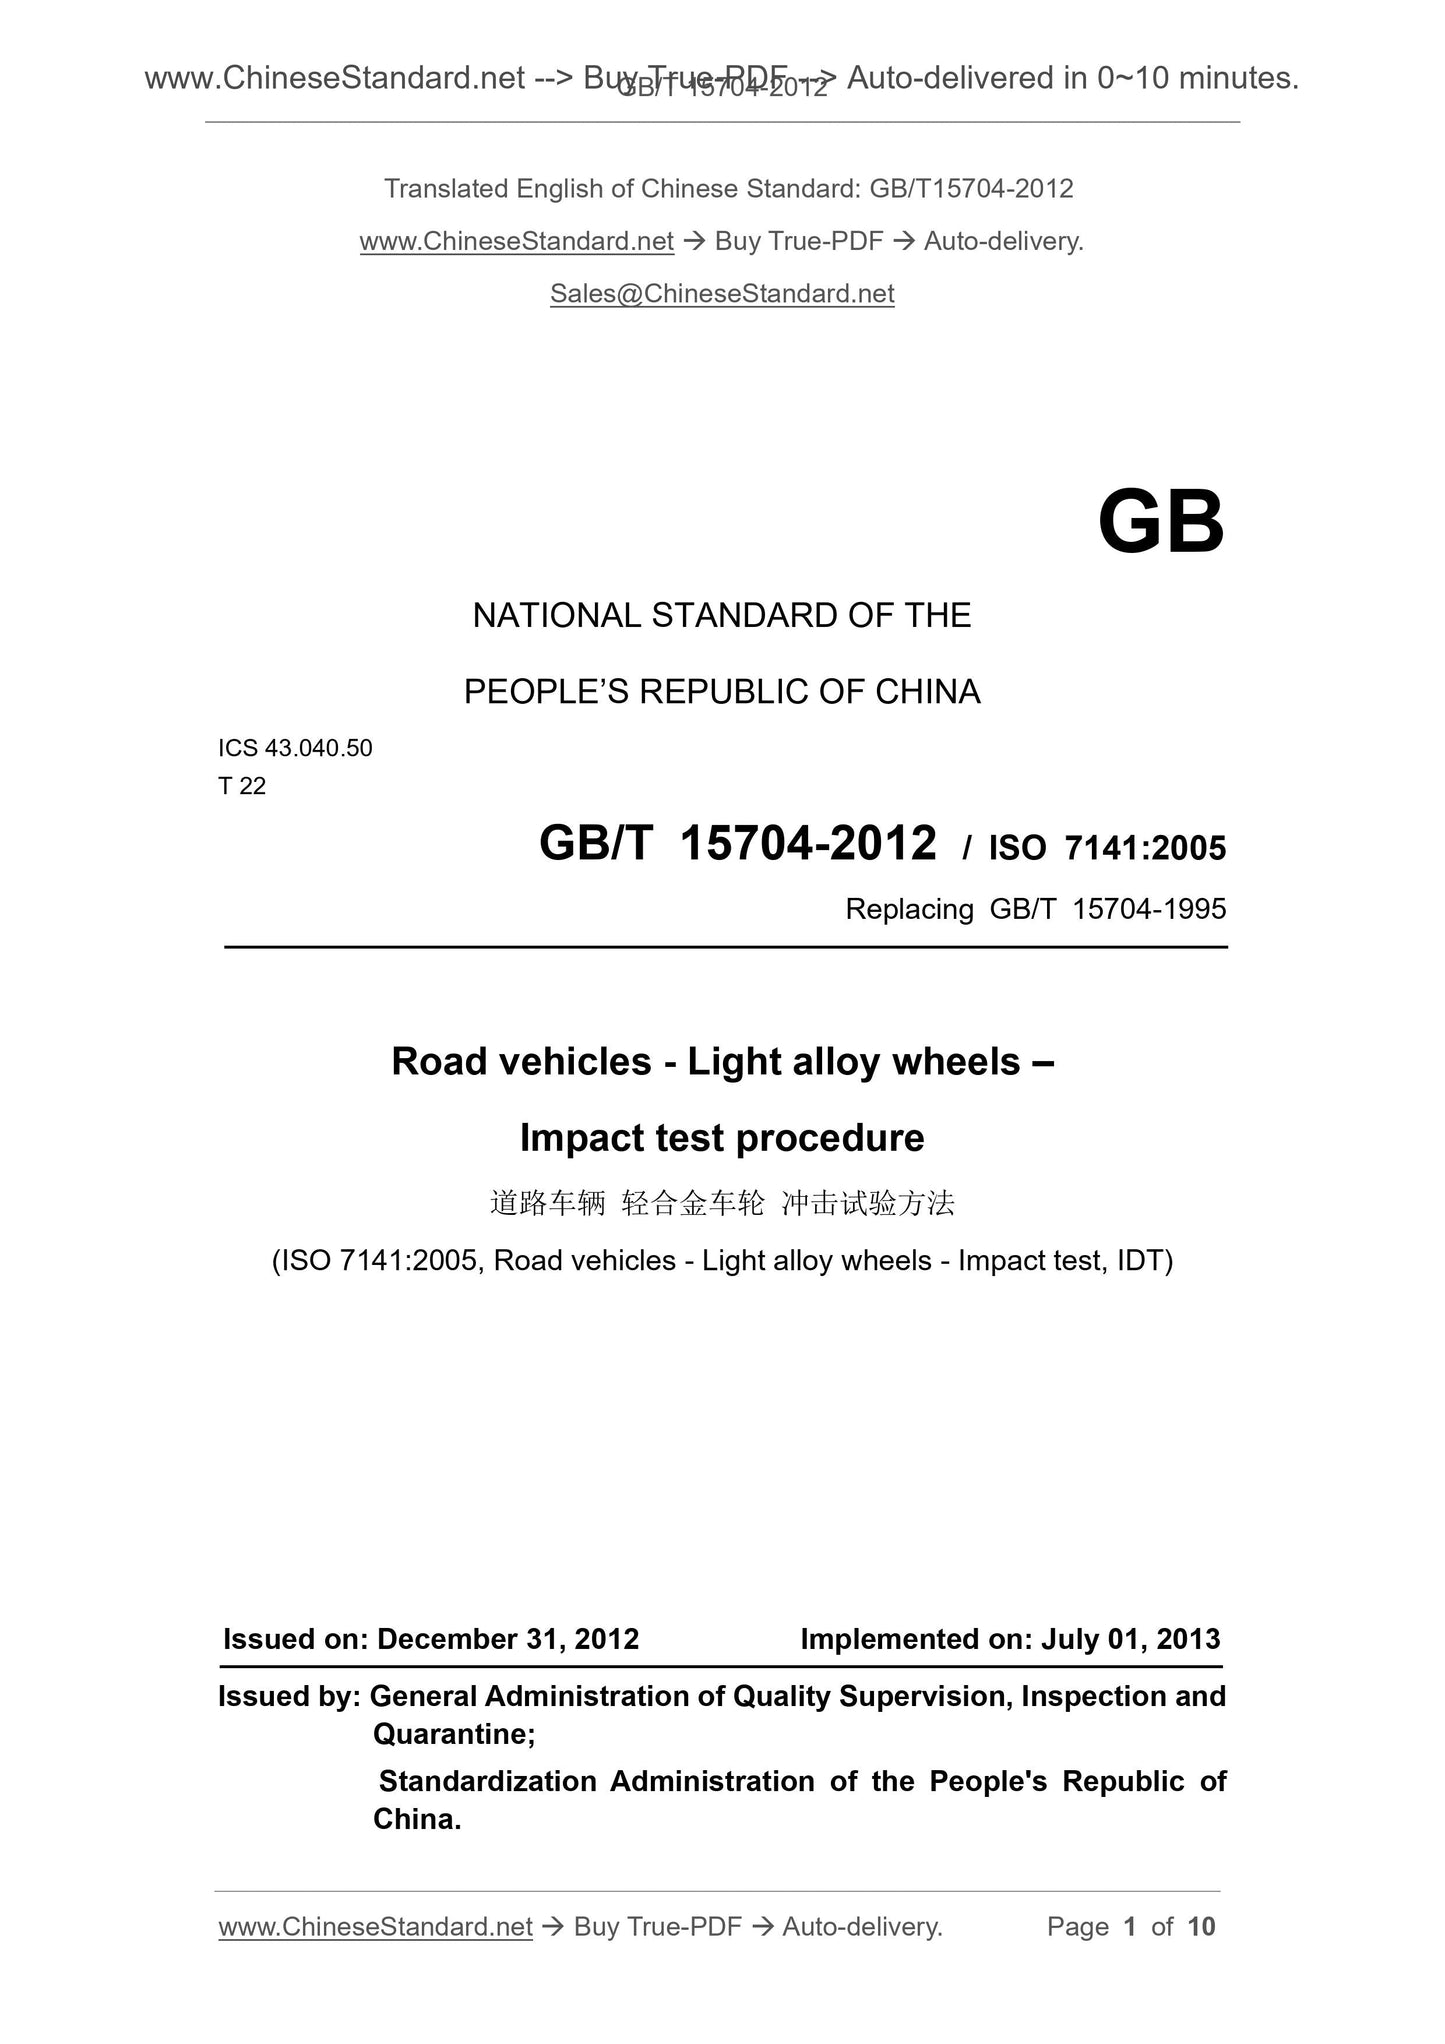 GB/T 15704-2012 Page 1